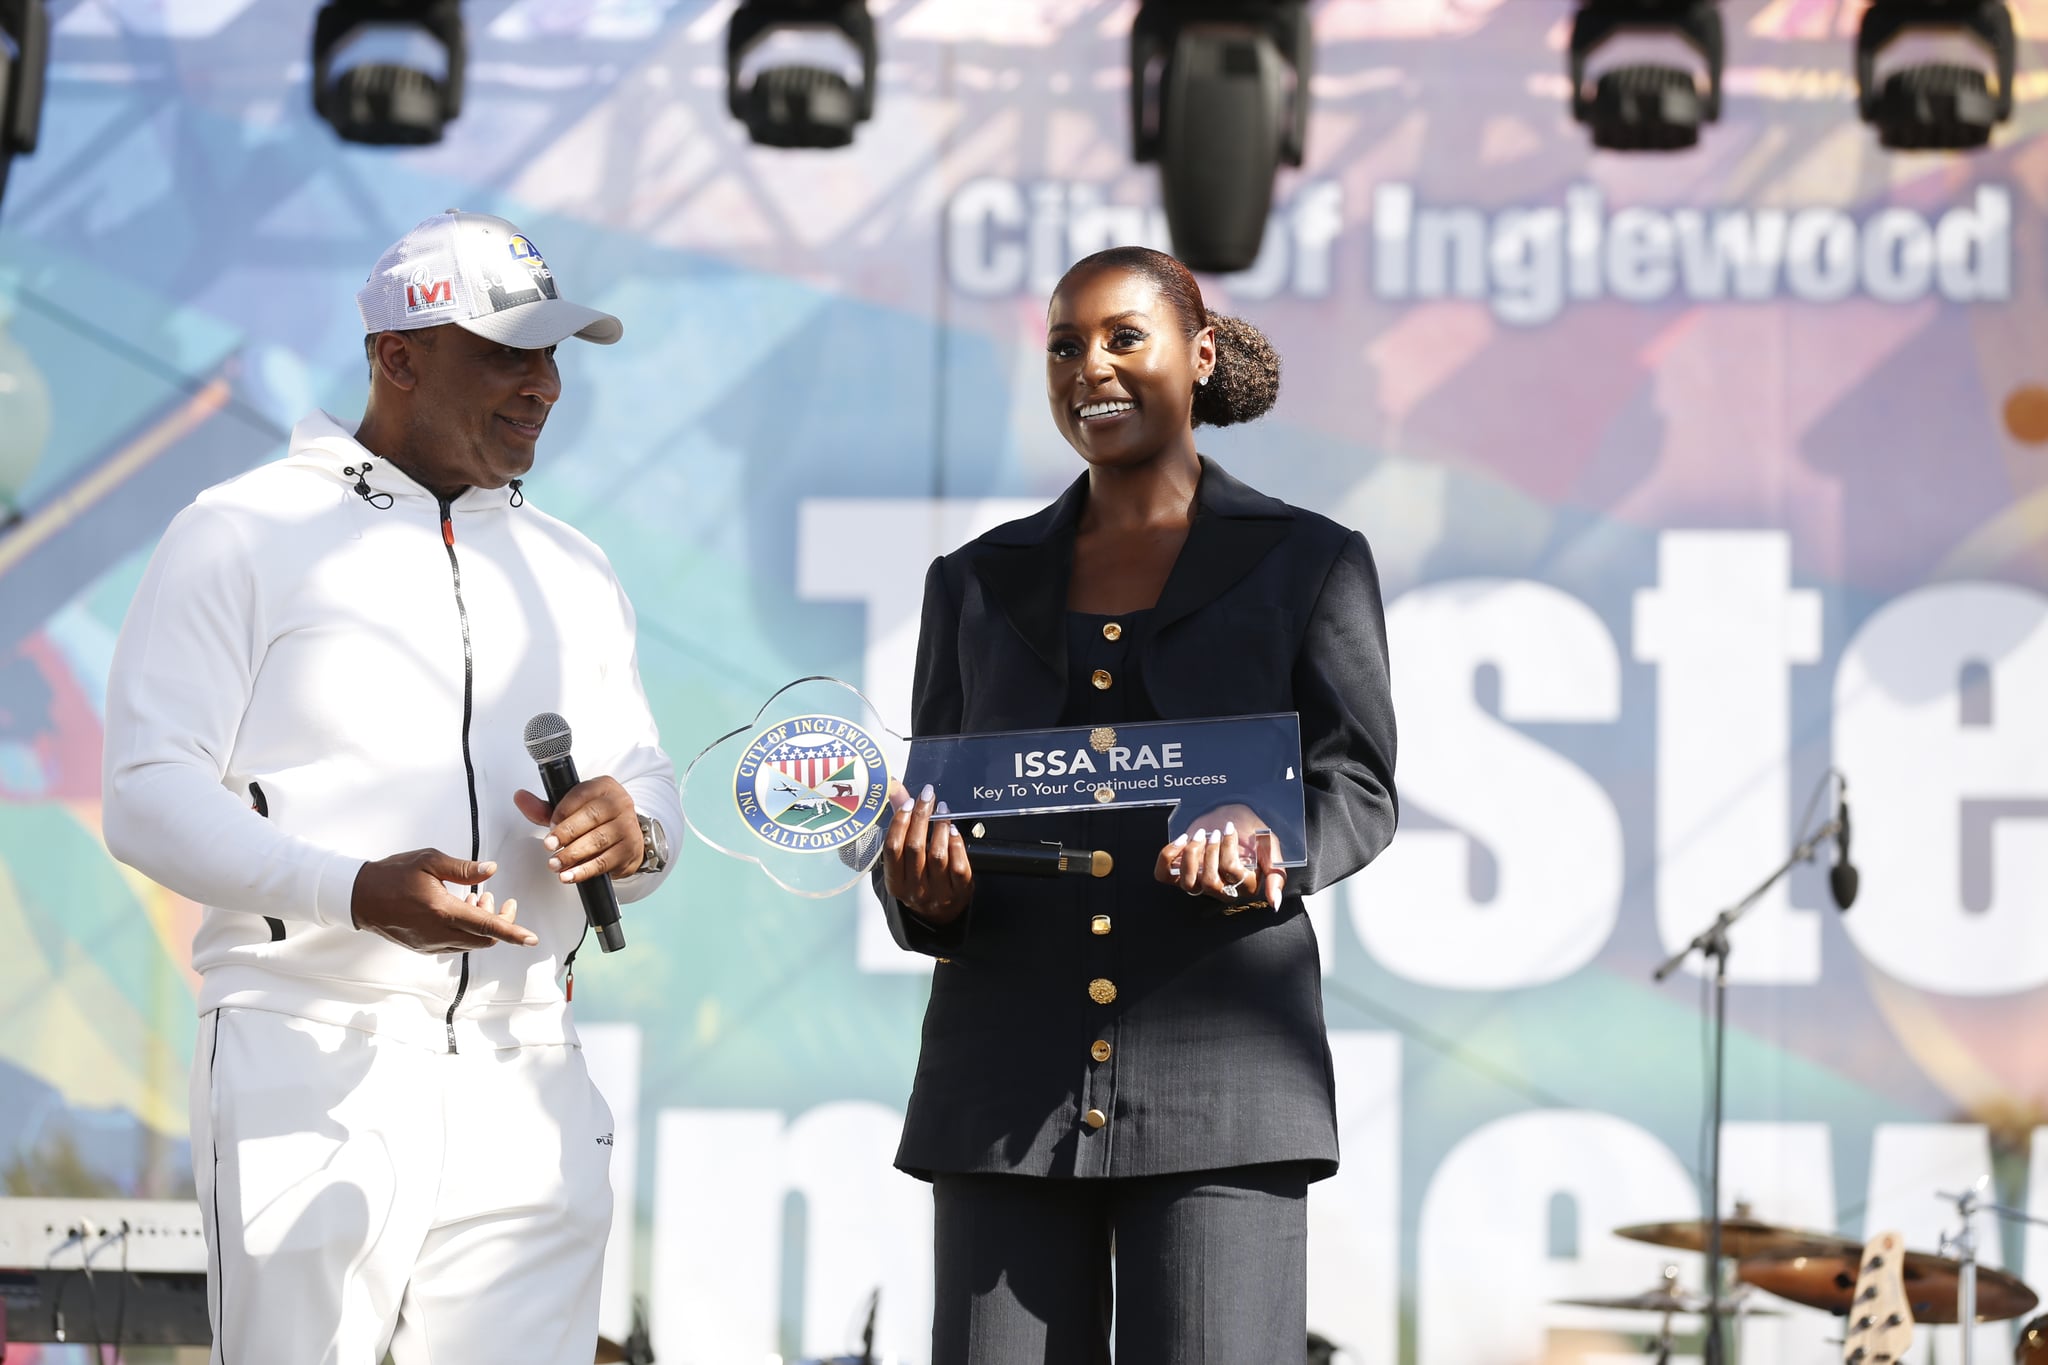 INGLEWOOD, CALIFORNIA - FEBRUARY 12: Inglewood Mayor James Butts presents Issa Rae with first ever City of Inglewood key to the city on stage during the Taste Of Inglewood Experience presents Market Street Vibez Pre-Game Extravaganza on February 12, 2022 in Inglewood, California. (Photo by Karim Saafir/Getty Images)